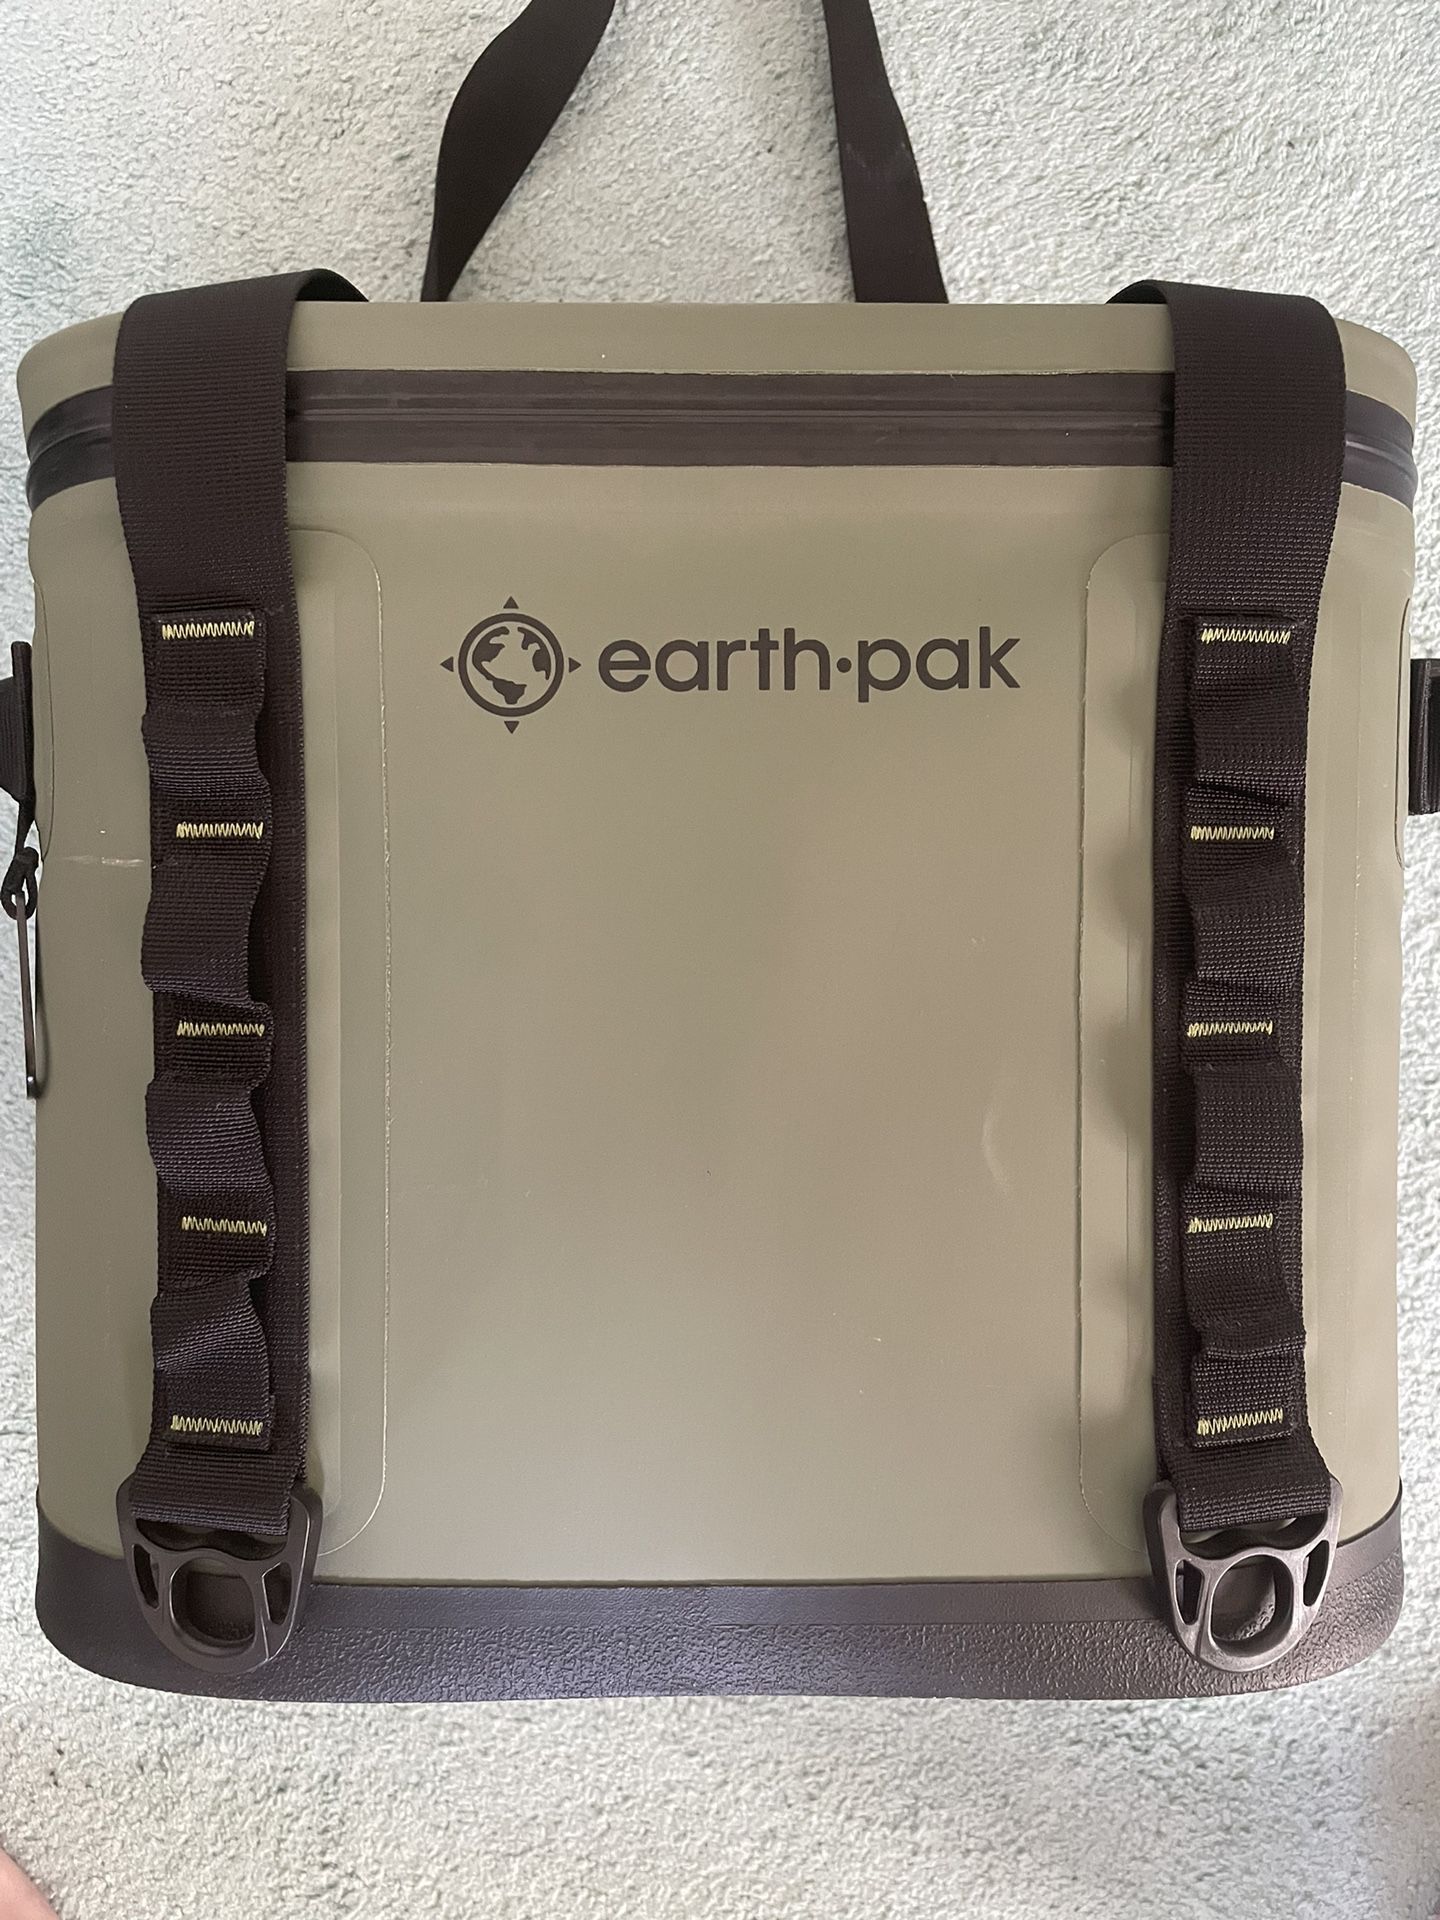 Like New Earth Pak Heavy Duty Waterproof 20-Can Soft Cooler Bag for Camping, Kayaking, Beach Trips